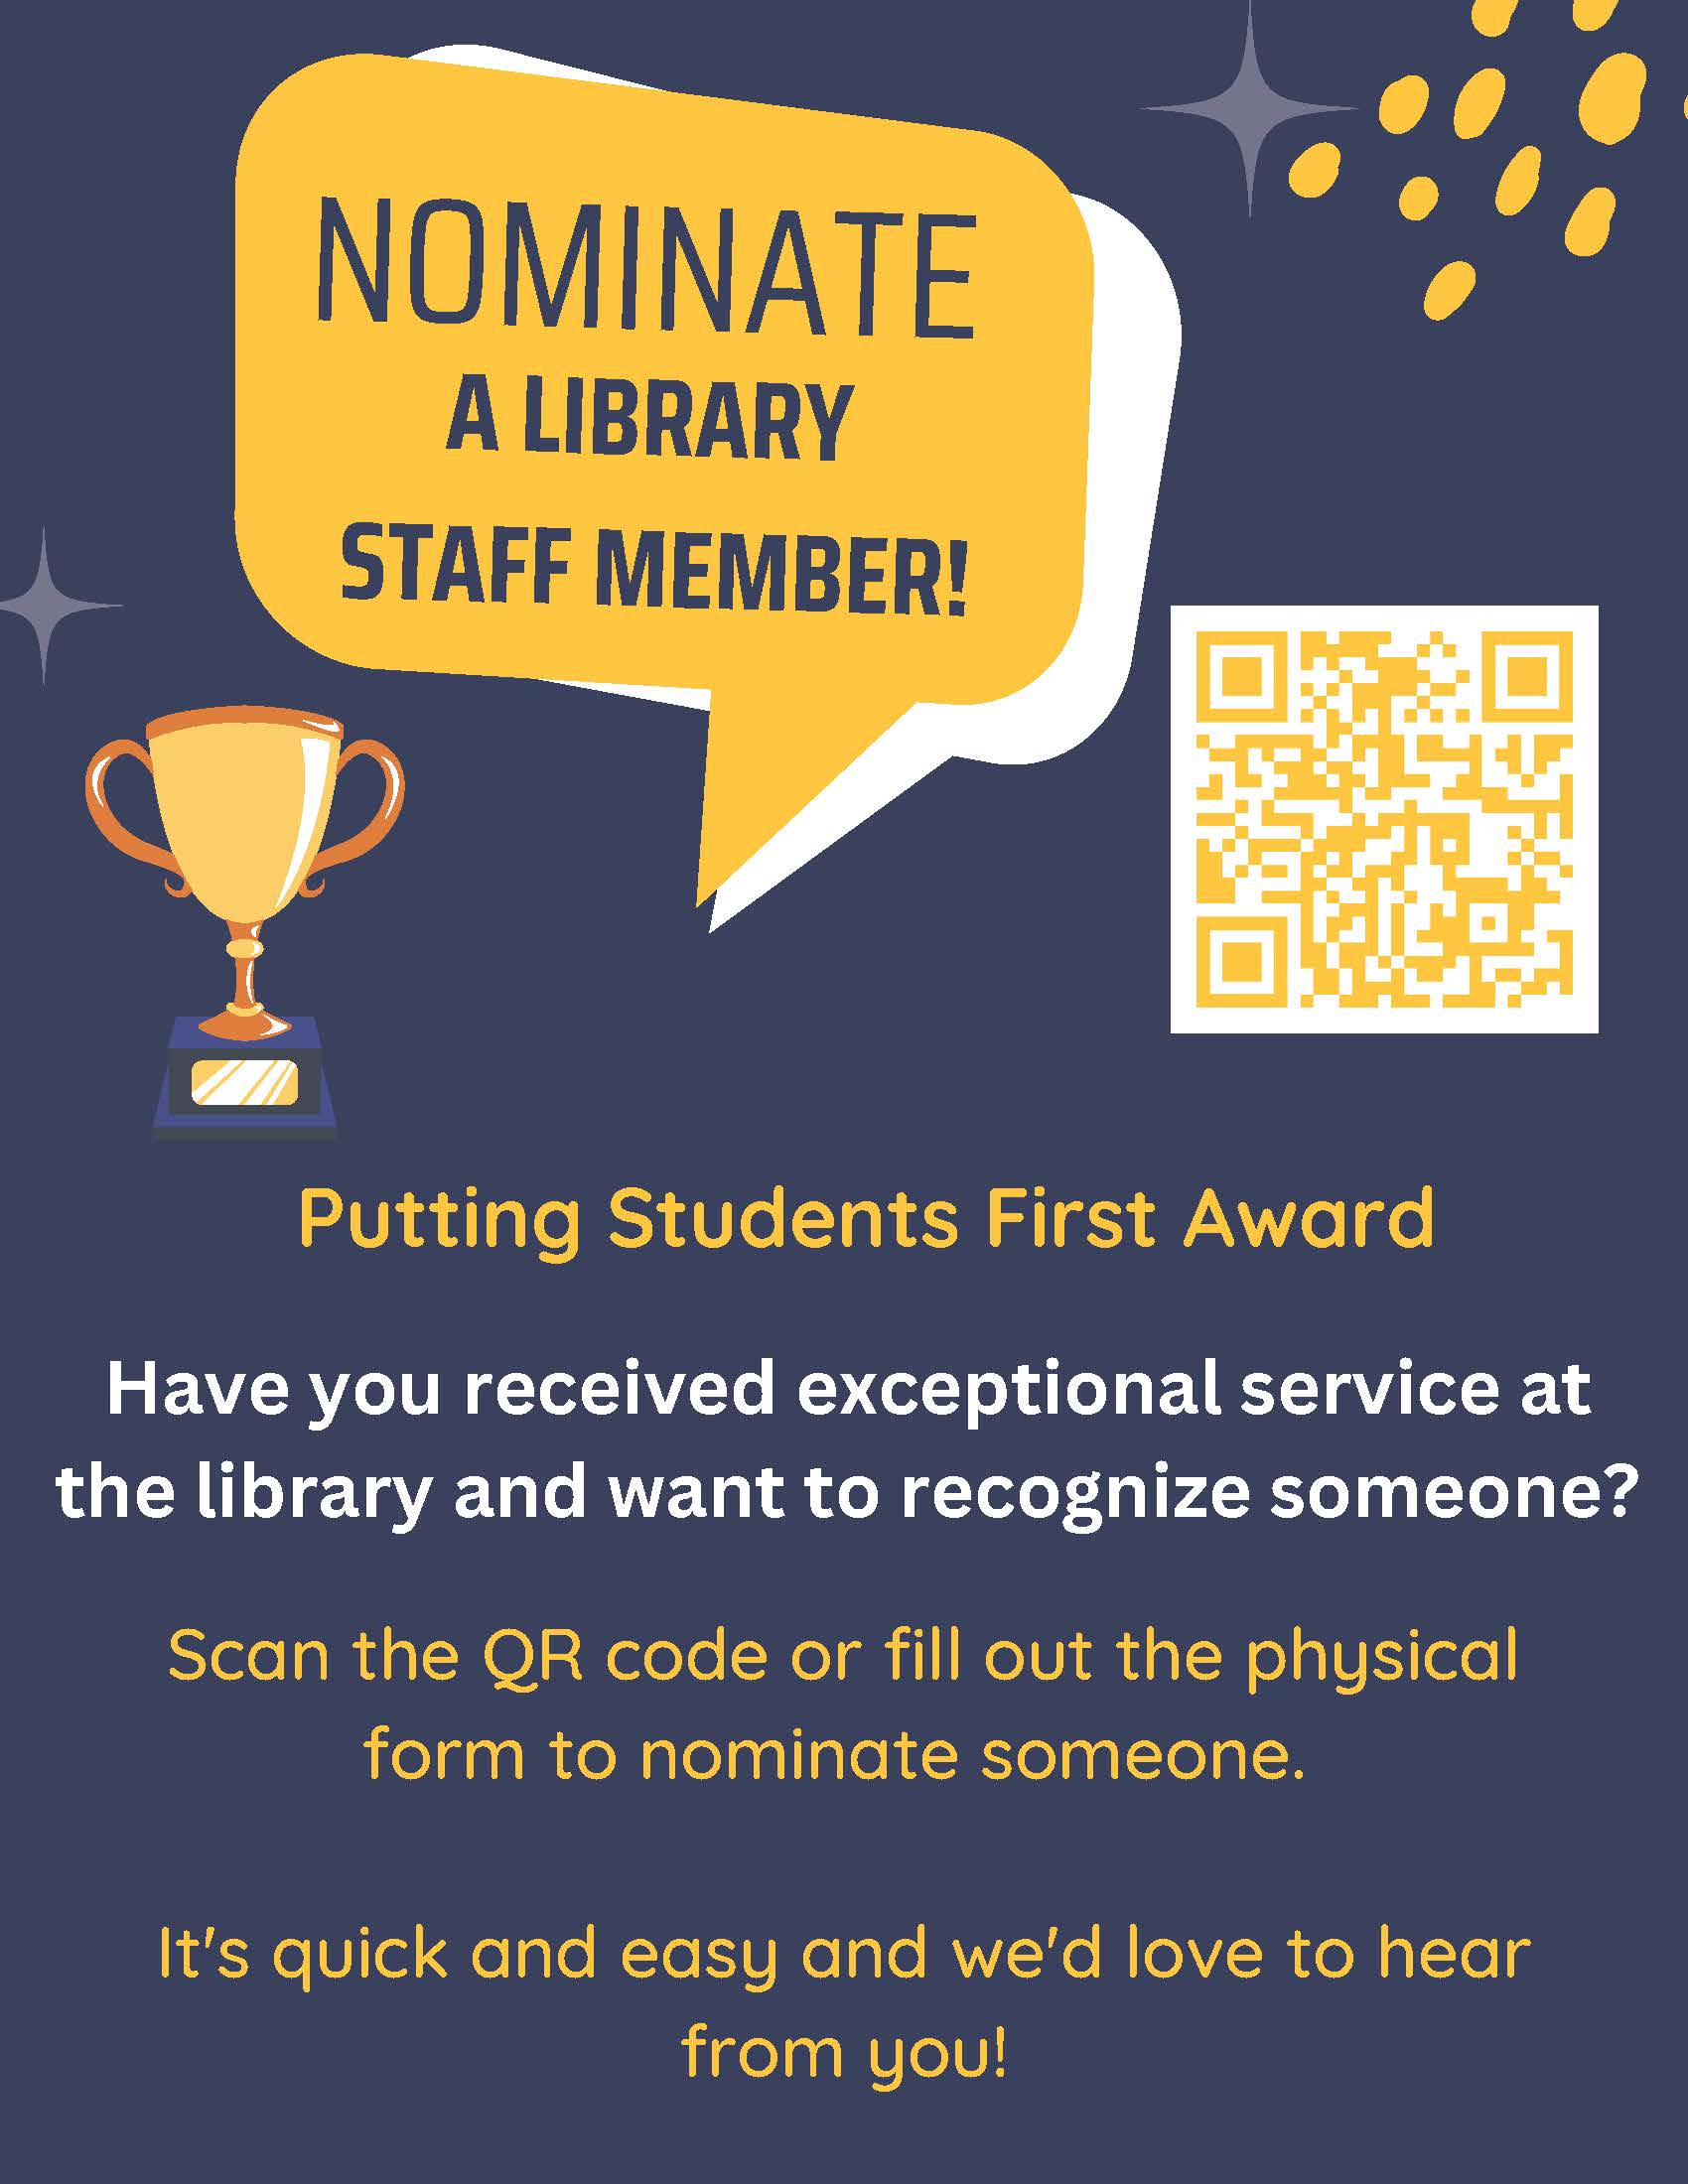 Nominate a library staff member for putting students first